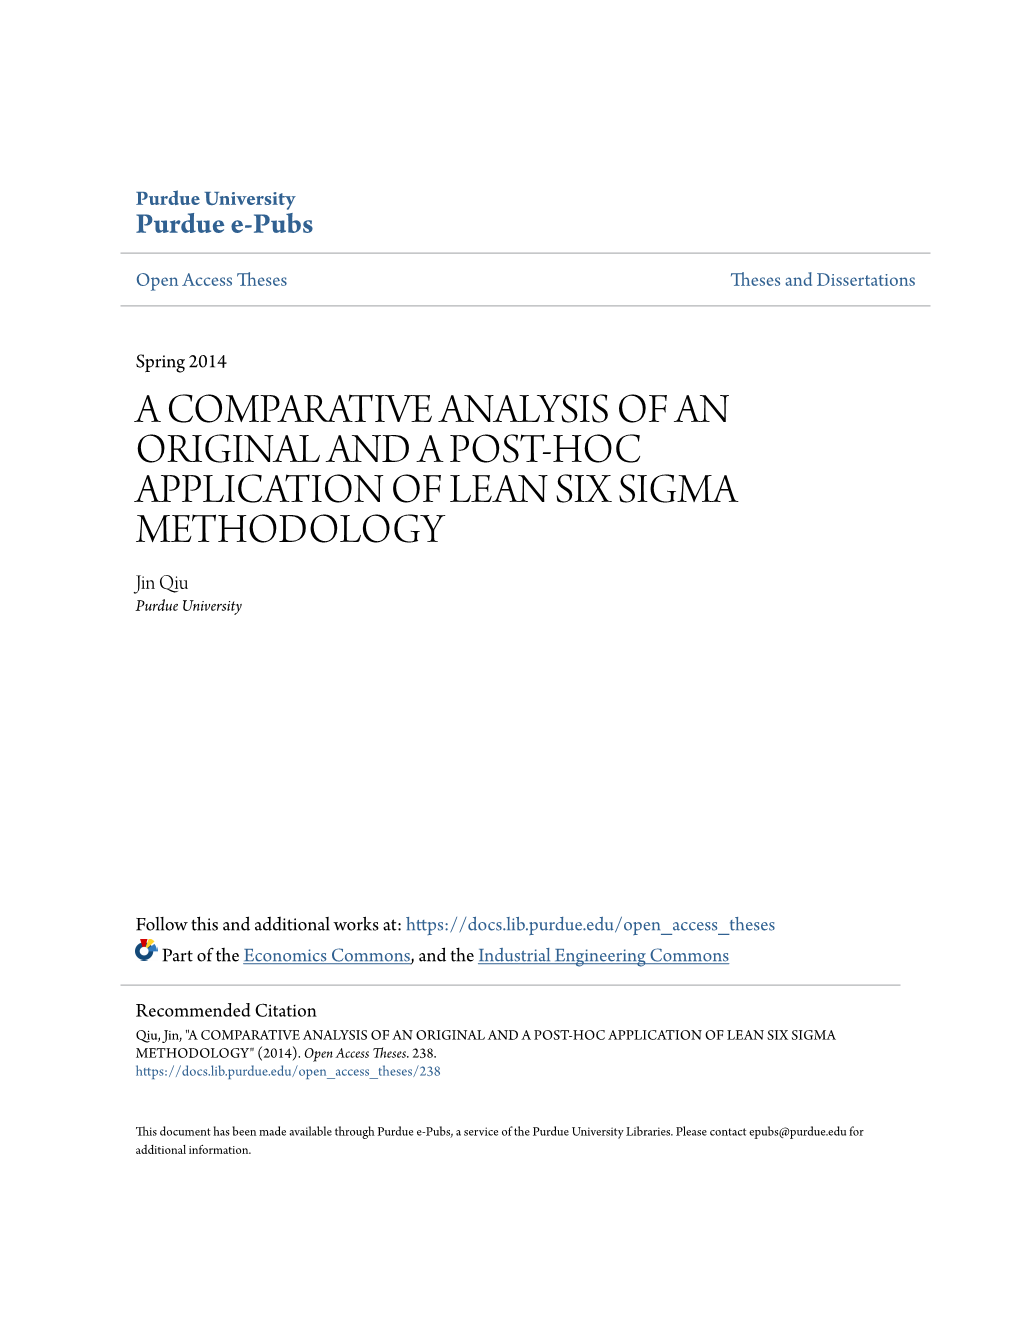 A COMPARATIVE ANALYSIS of an ORIGINAL and a POST-HOC APPLICATION of LEAN SIX SIGMA METHODOLOGY Jin Qiu Purdue University